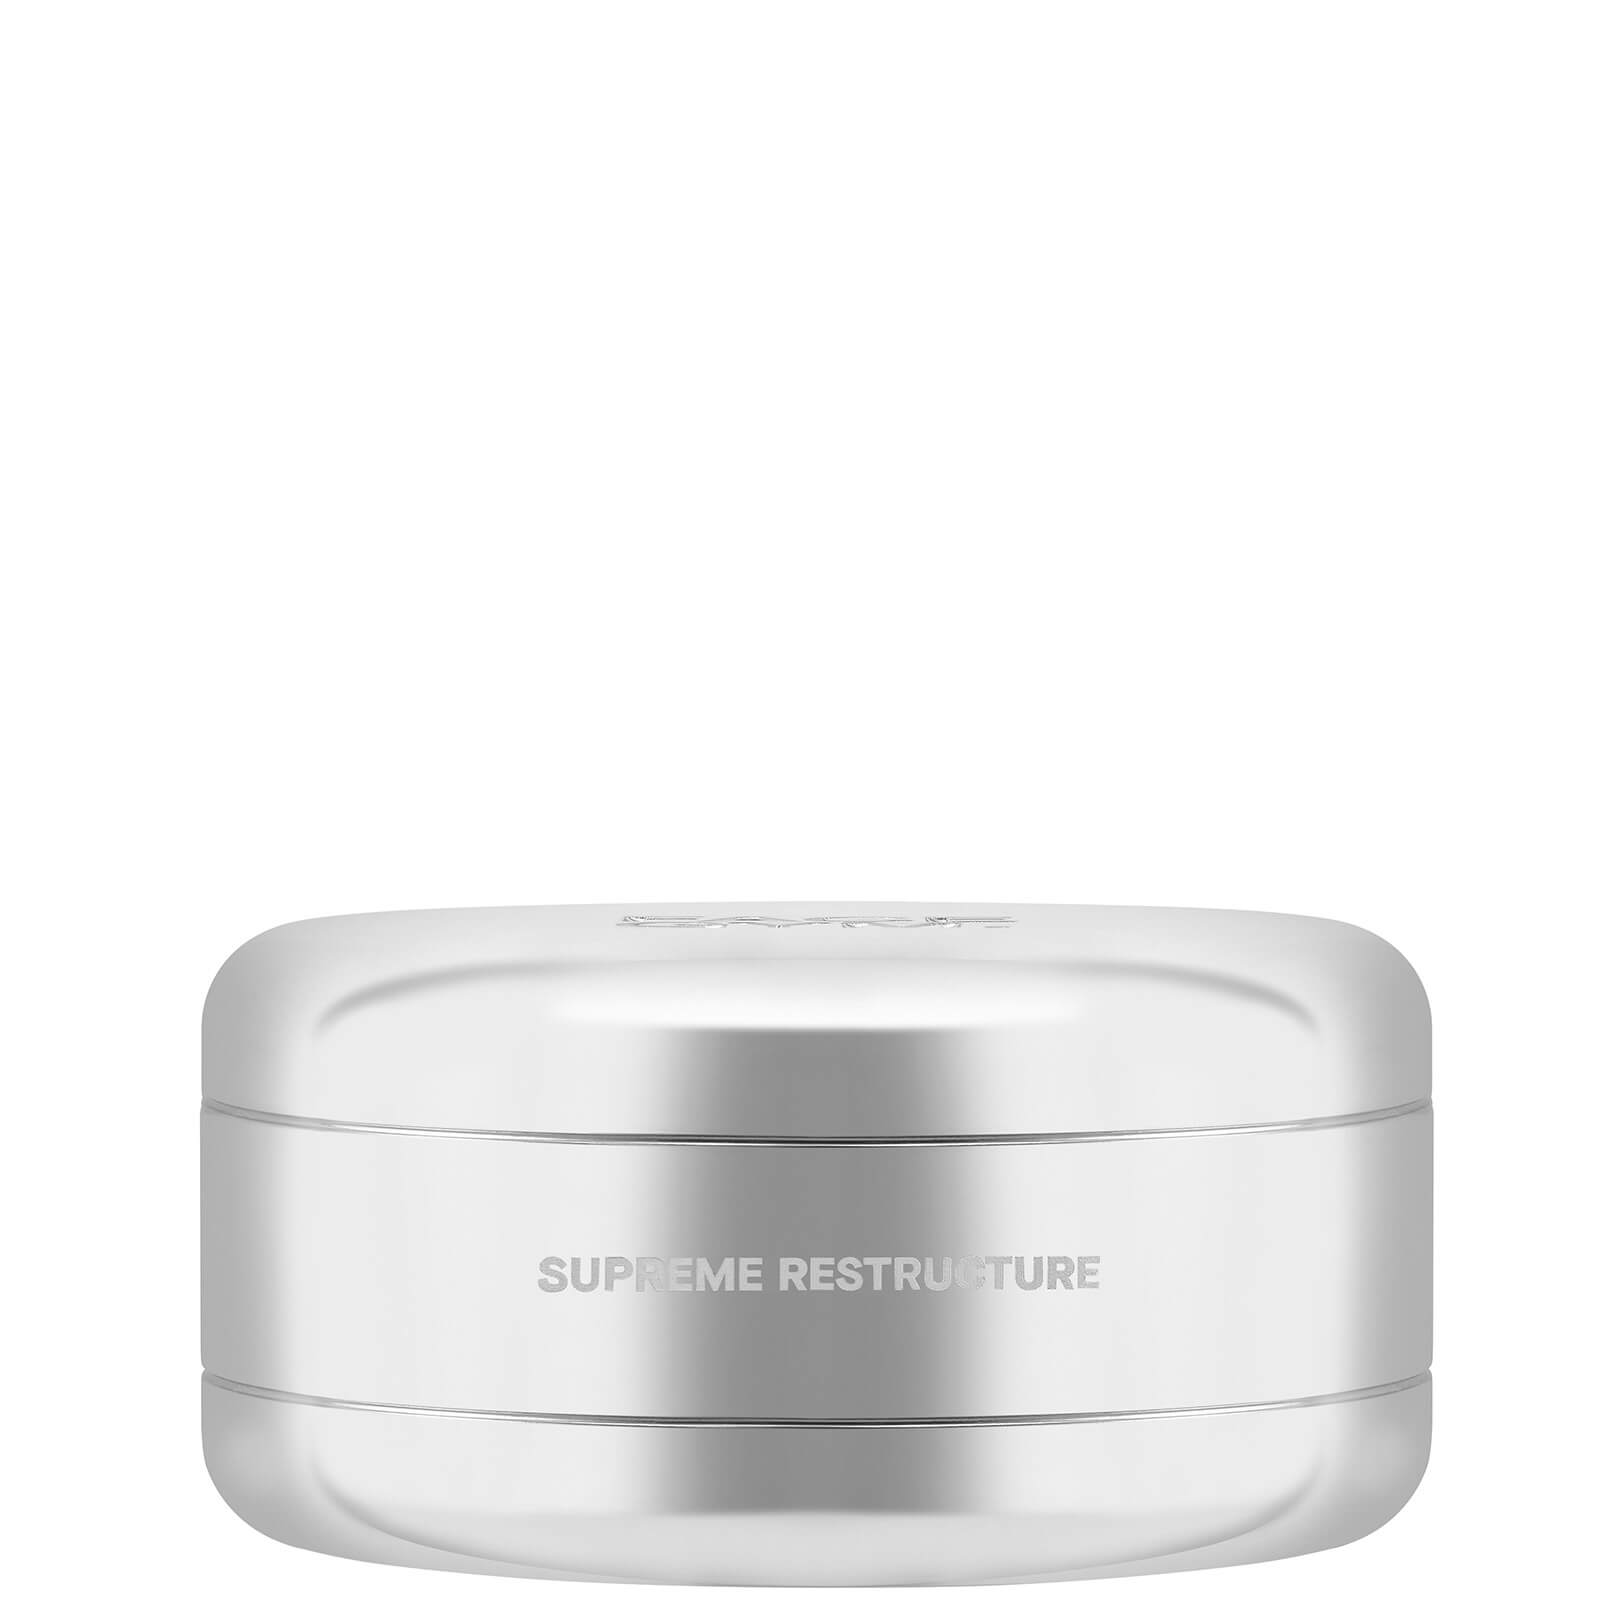 FaceGym Supreme Restructure Firming EGF Collagen Boosting Cream (Various Sizes) - 50ml